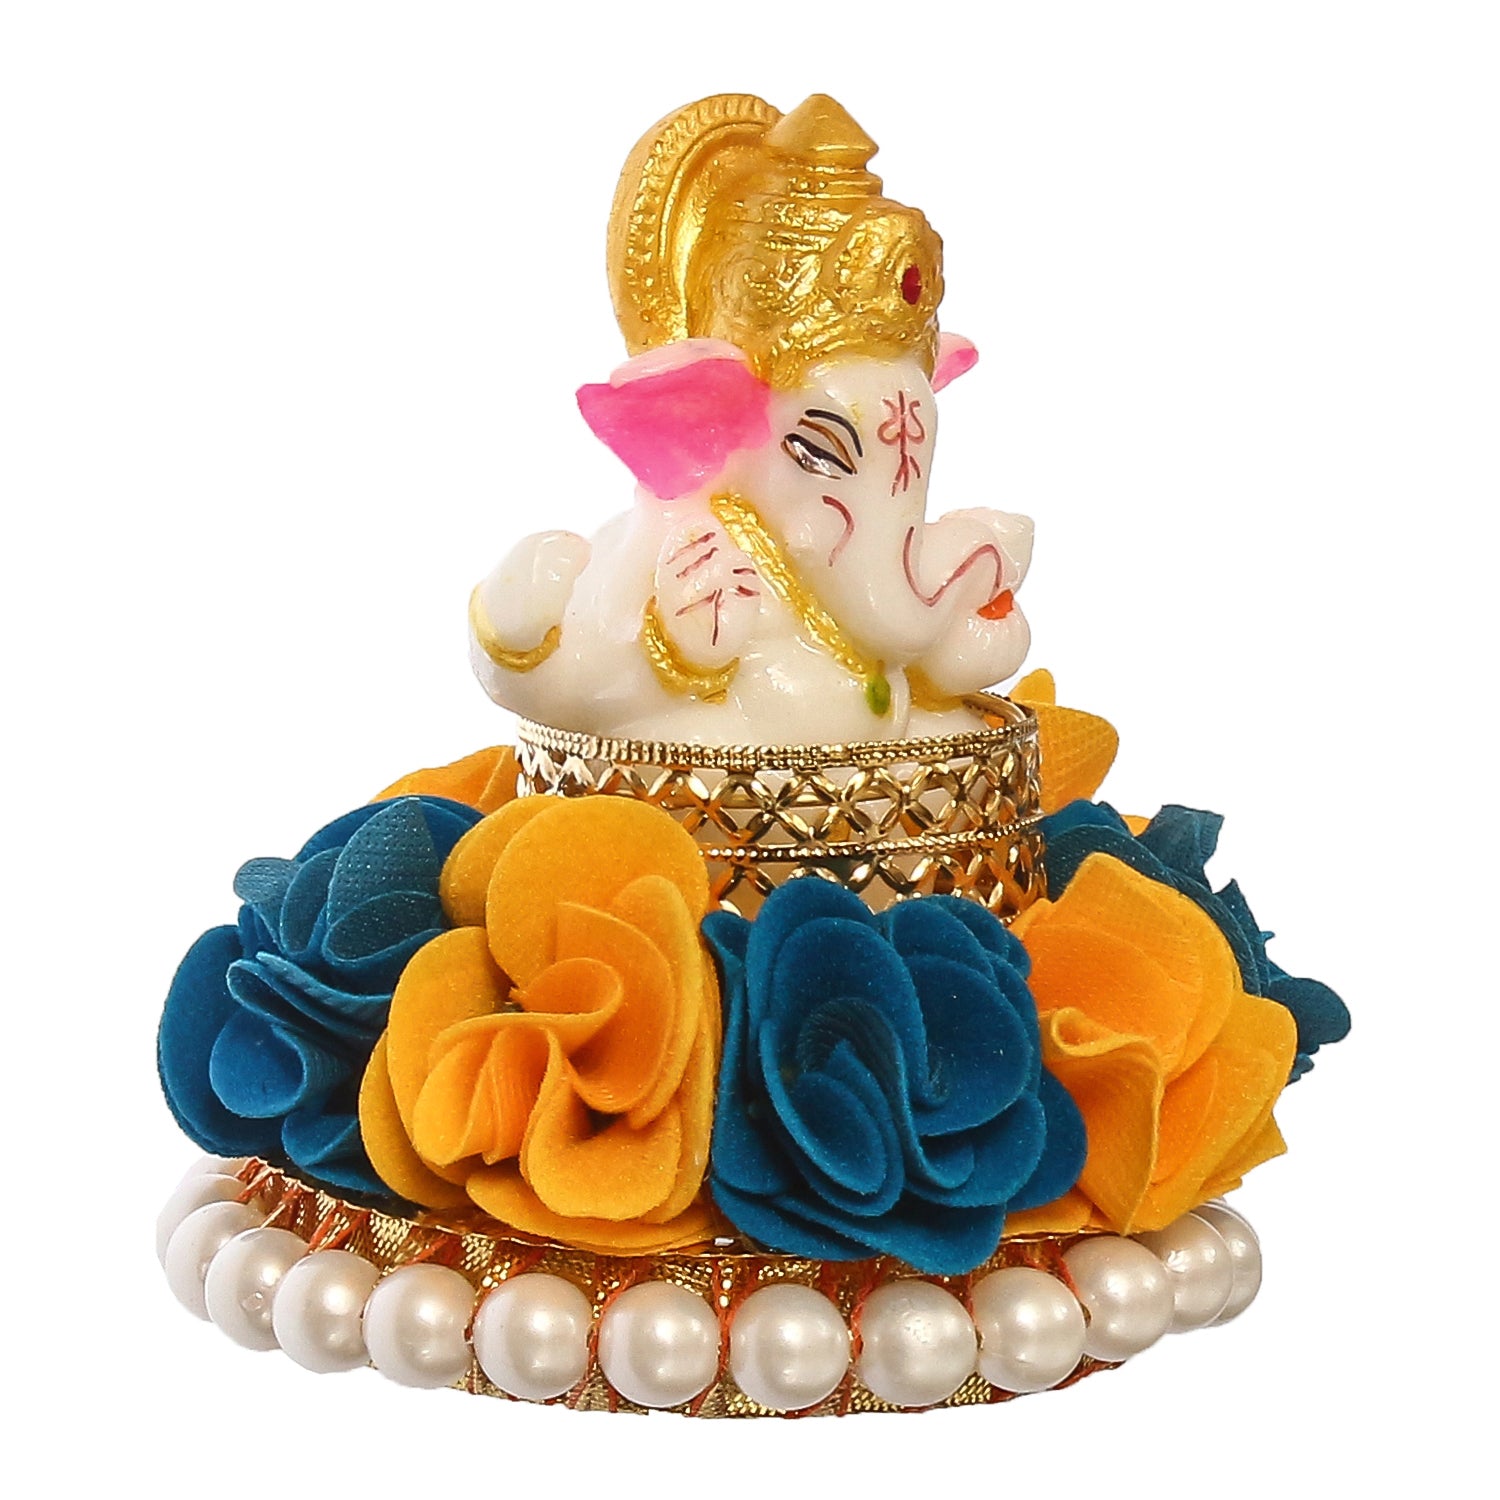 Lord Ganesha Idol on Decorative Handcrafted Plate with Yellow and Blue Flowers 3